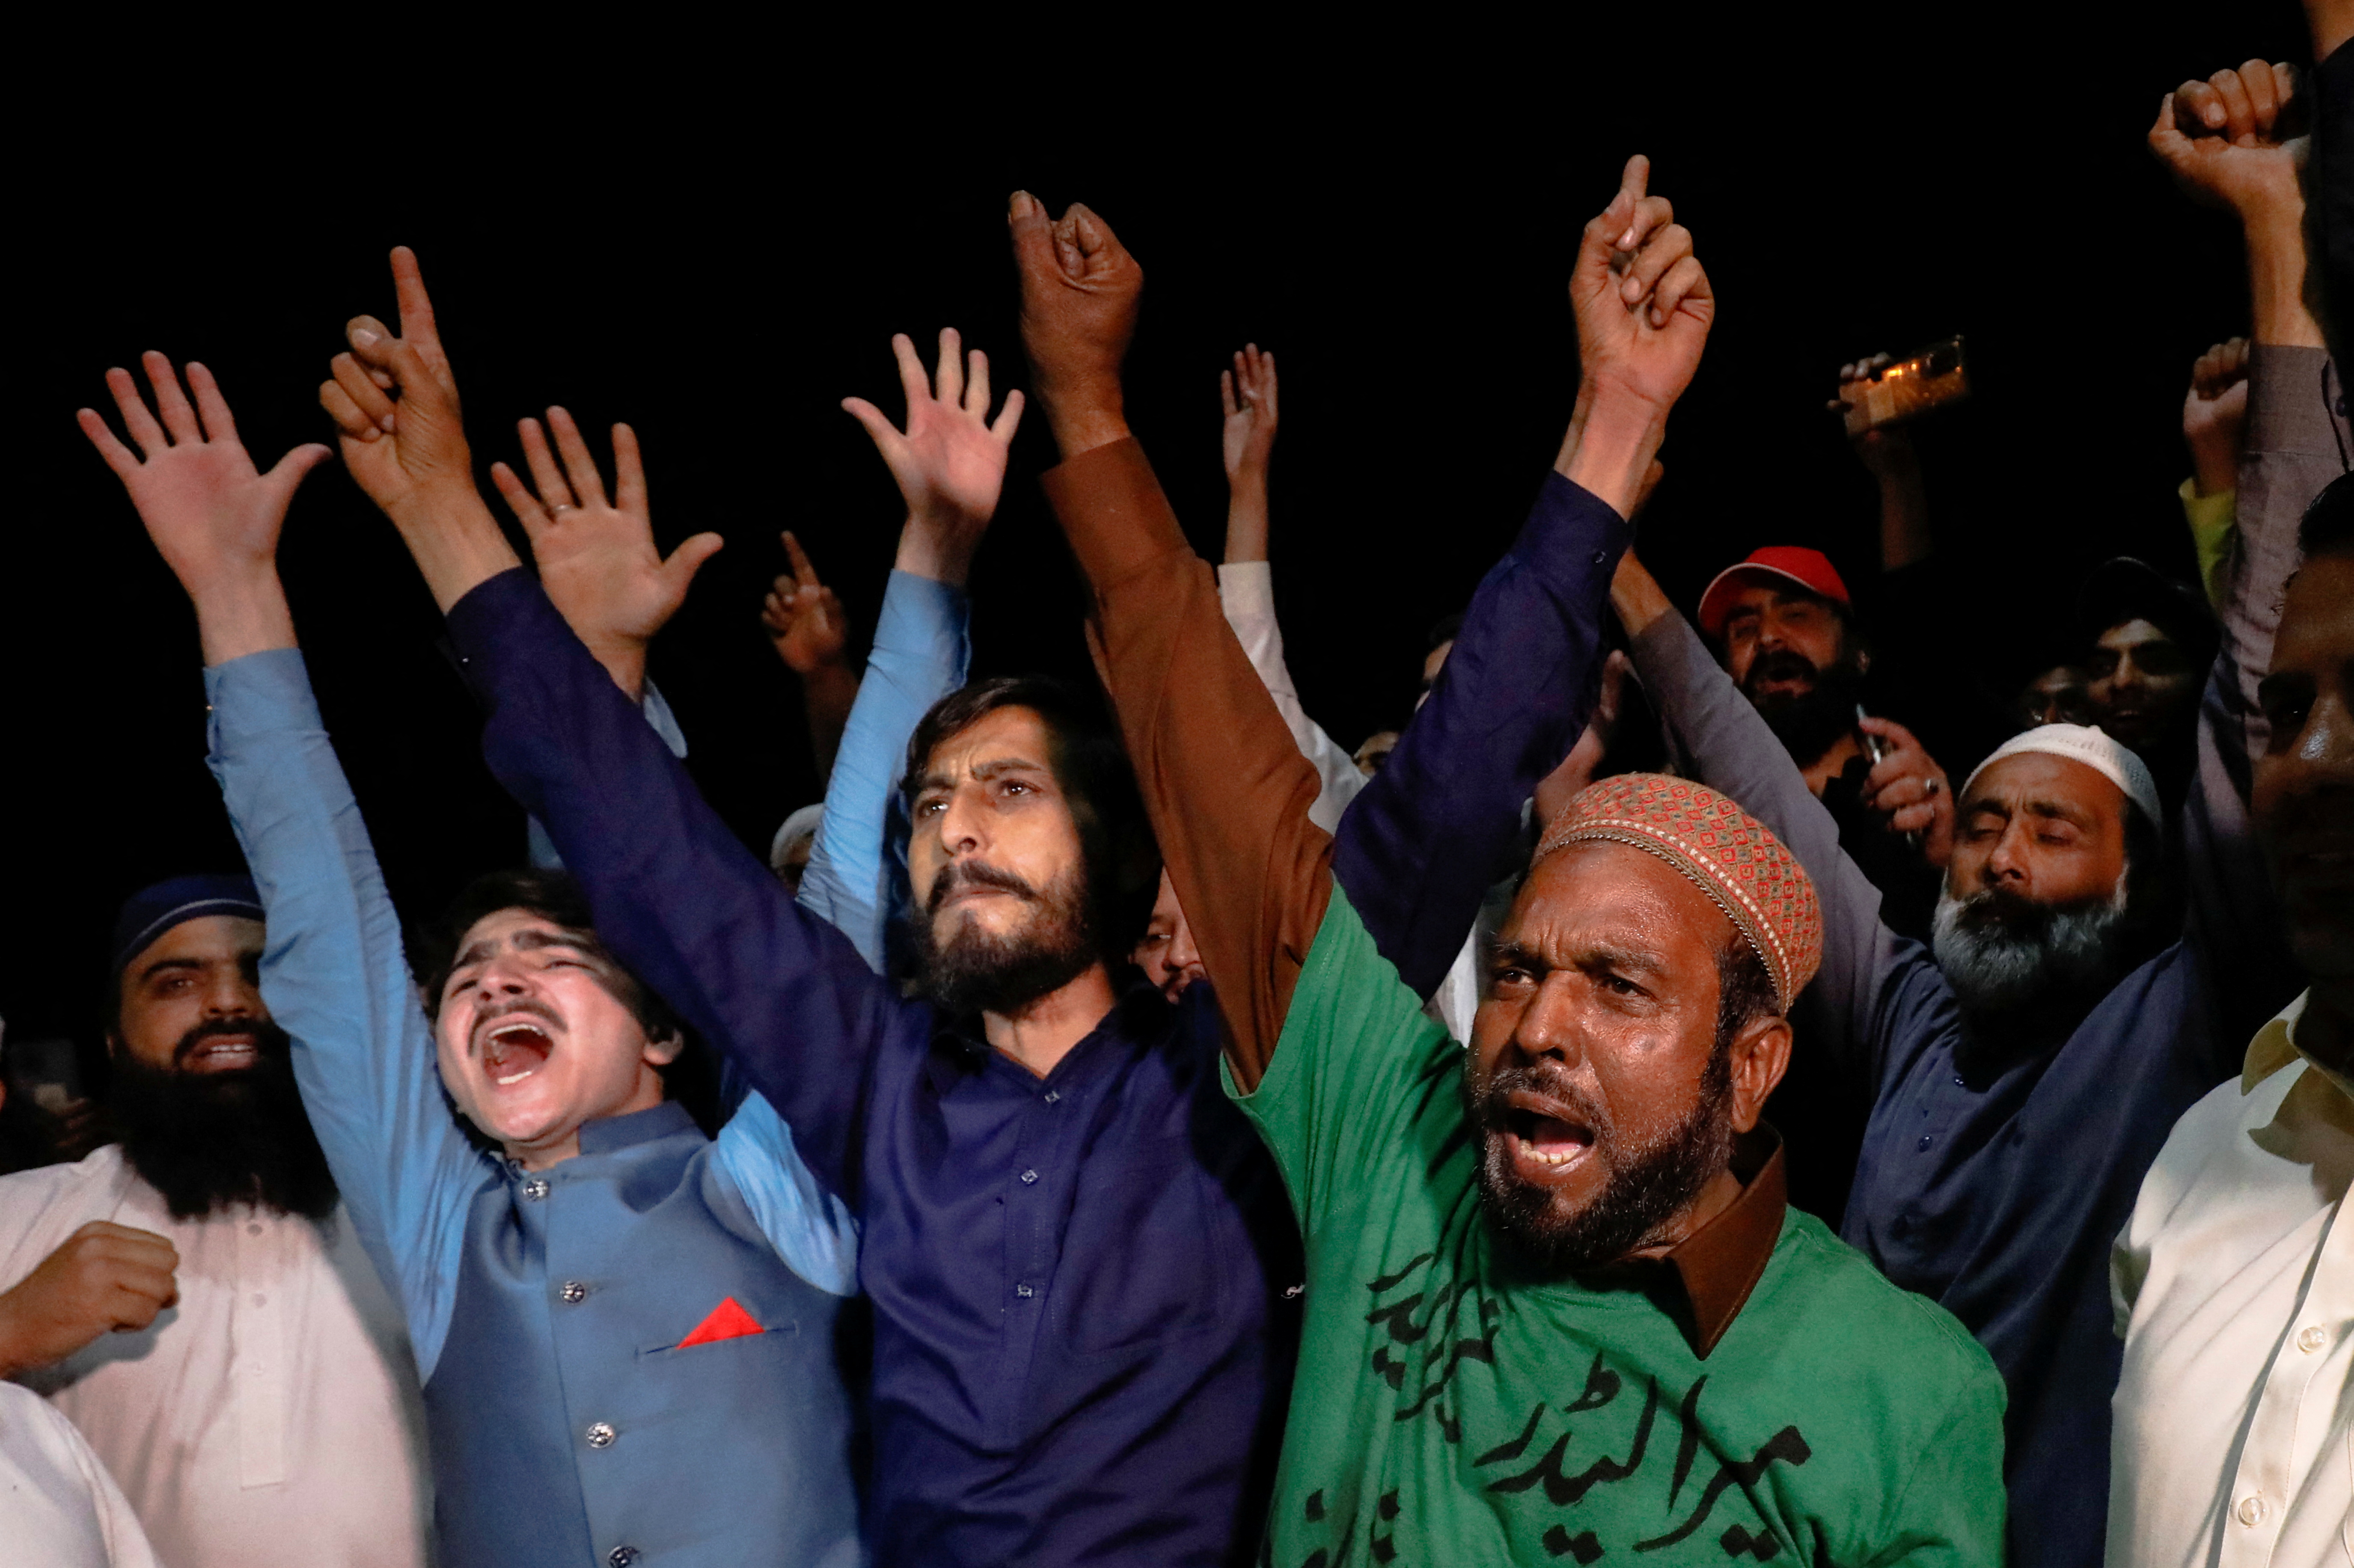 Pakistan Democratic Movement supporters celebrate after former PM Khan lost a confidence vote, in Islamabad